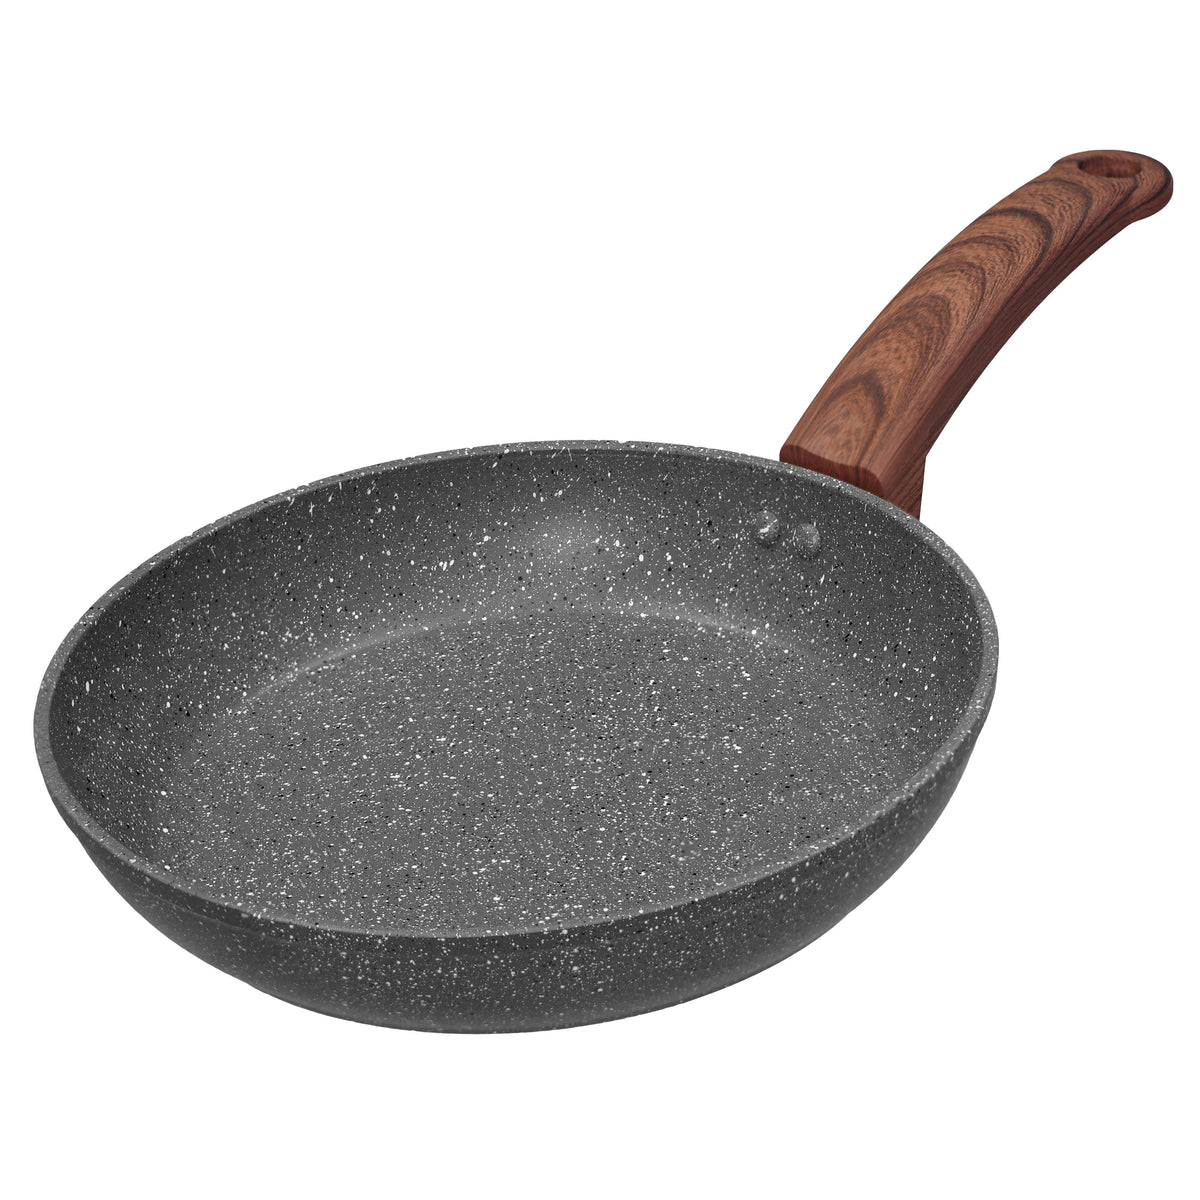 Easy chef always 2 Quart Saucepan with lid, Nonstick Small Sauce Pot with  Granite Coating, Cooking Sauce Pan, Saucepan for Stove Top, Healthy  Nonstick